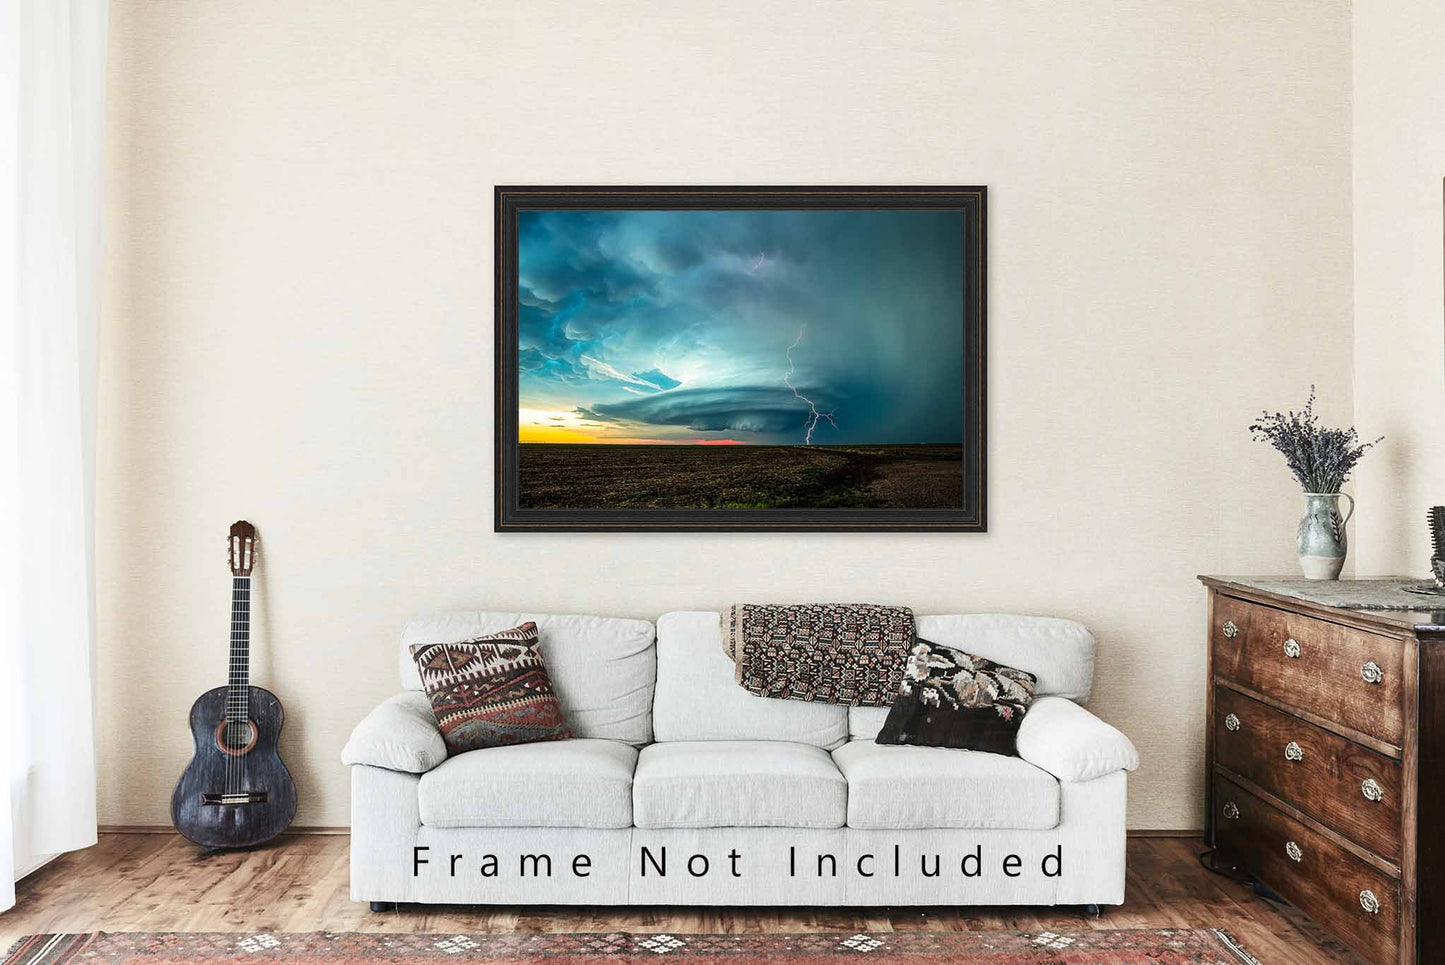 Storm Photography Print (Not Framed) Picture of Supercell Thunderstorm with Lightning Bolt at Sunset on Stormy Spring Evening in Kansas Weather Wall Art Nature Decor